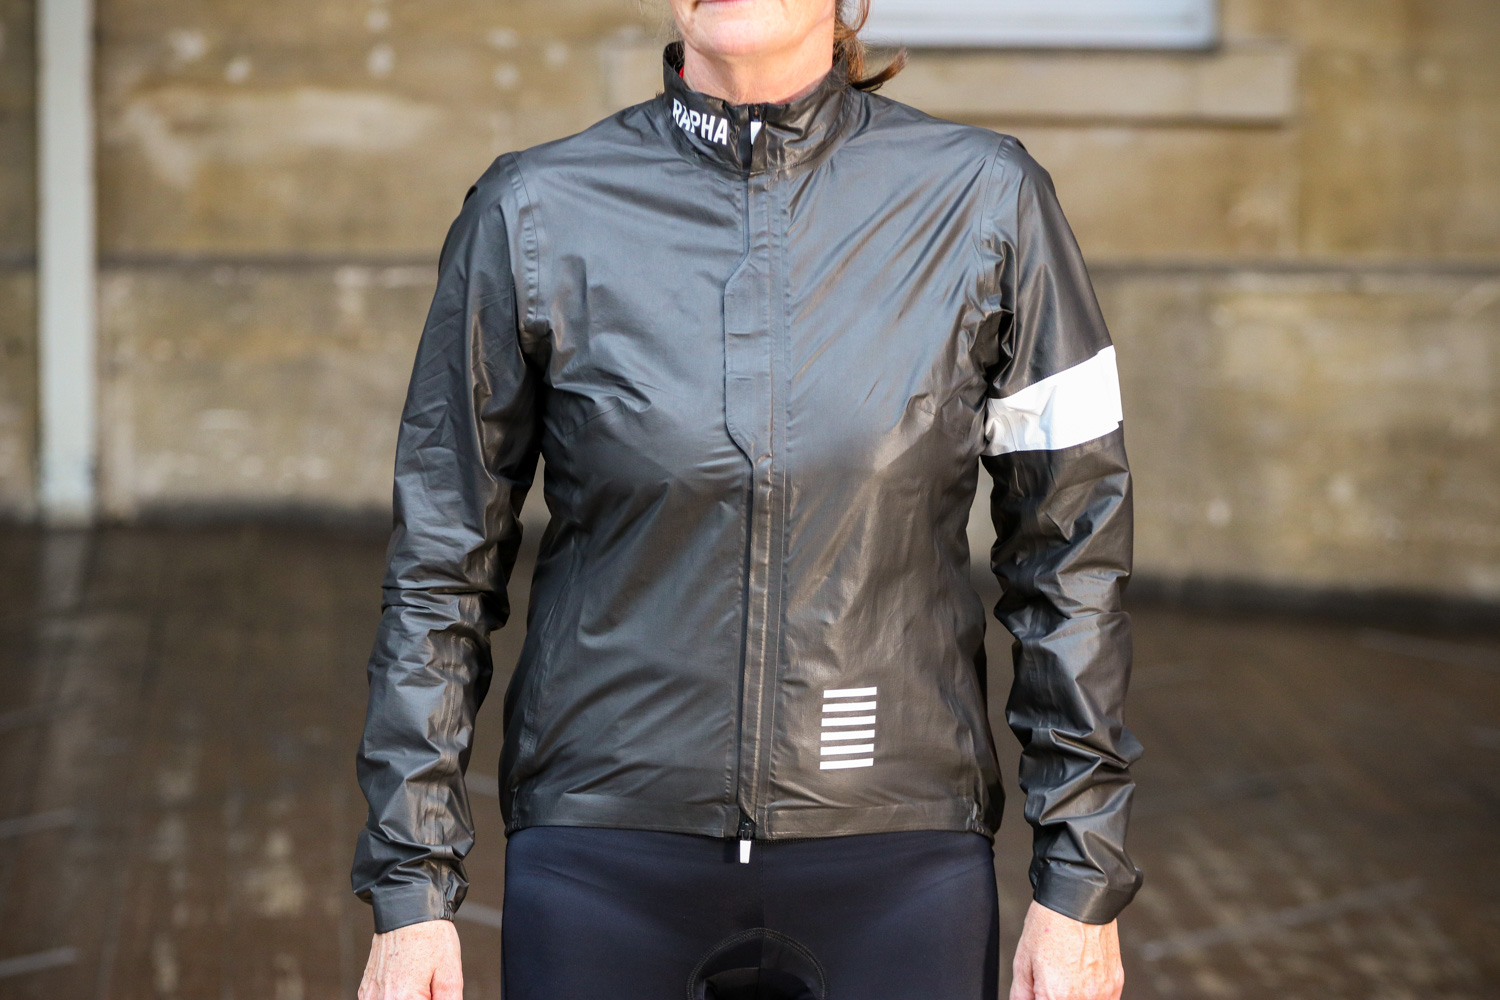 Magistrate Resume Lock Review: Rapha Women's Pro Team Lightweight Gore-Tex Jacket | road.cc